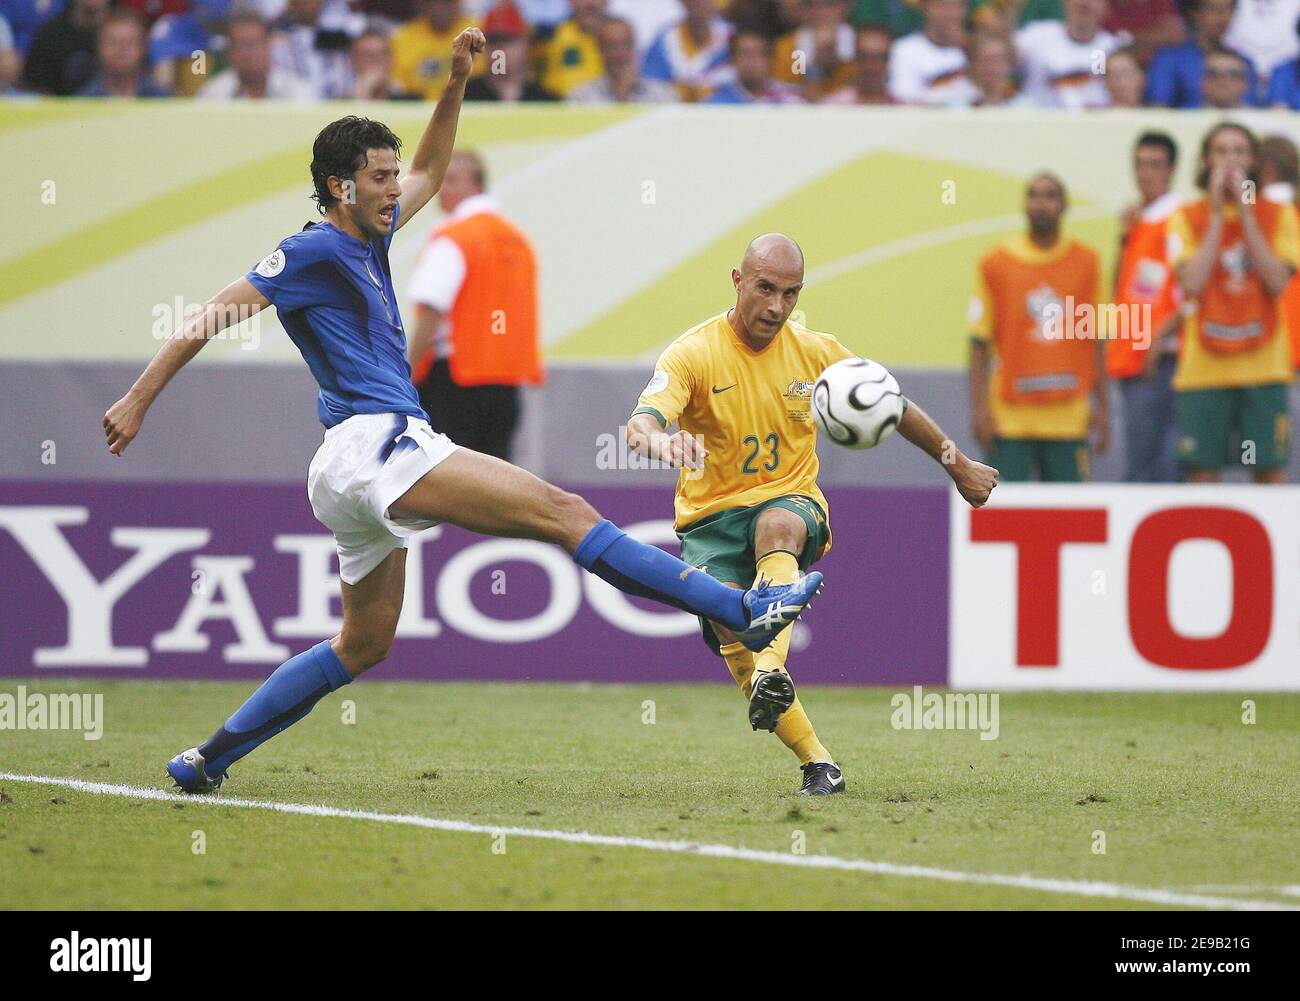 Italy's Fabio Grosso and Australia's Mark Bresciano battle for the ball during the World Cup 2006, Second round, Australia vs Italy at the Fritz-Walter-Stadion in Kaiserslautern, Germany on June 26, 2006. Italy won 1-0 on a last-minute penalty kick. Photo by Christian Liewig/ABACAPRESS.COM Stock Photo